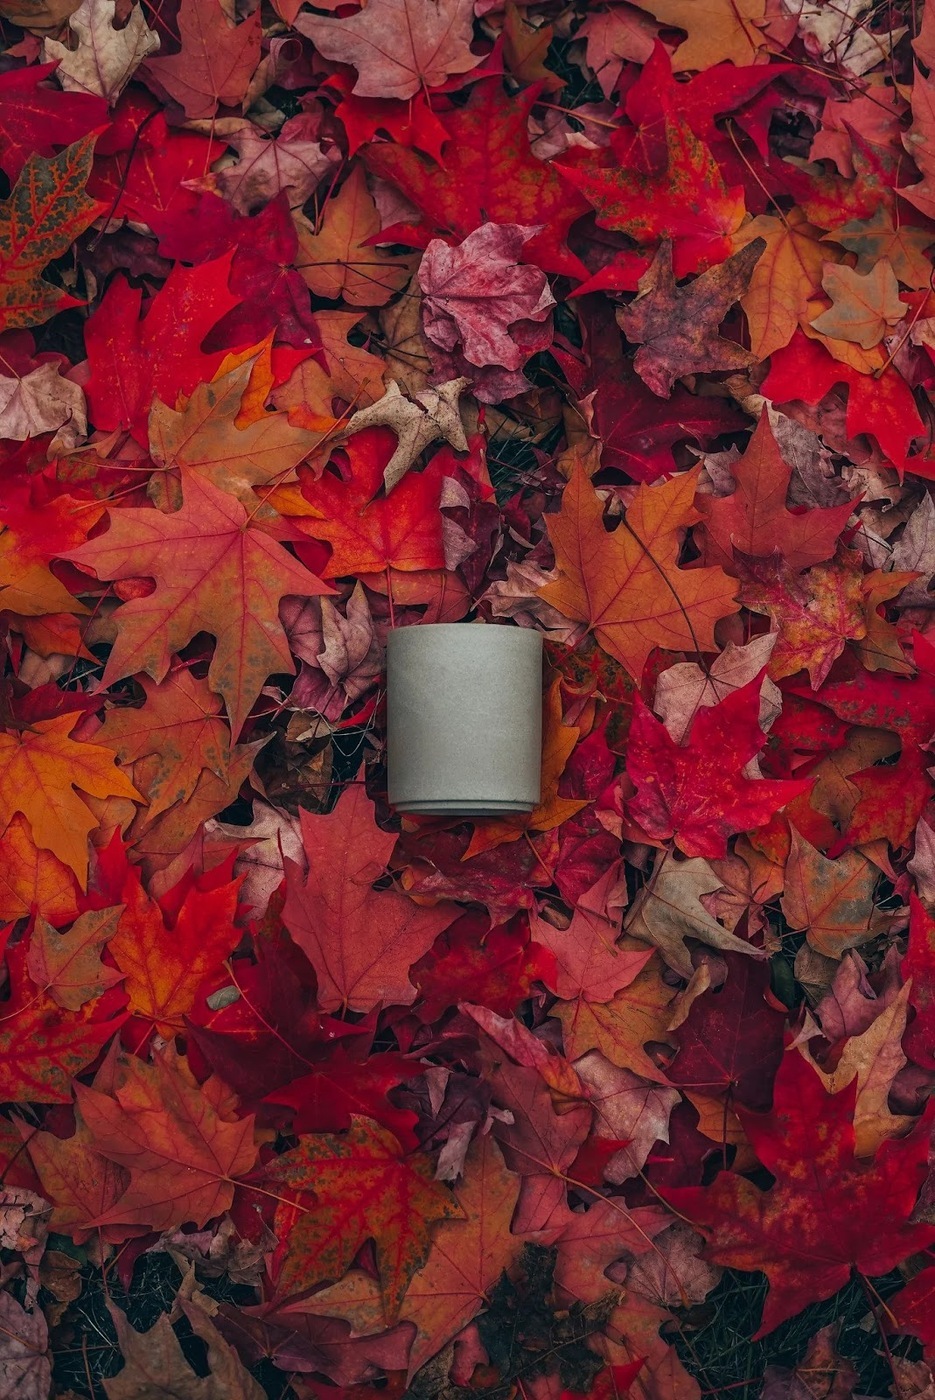 A photo of the obie coffee mug in a pile of leaves